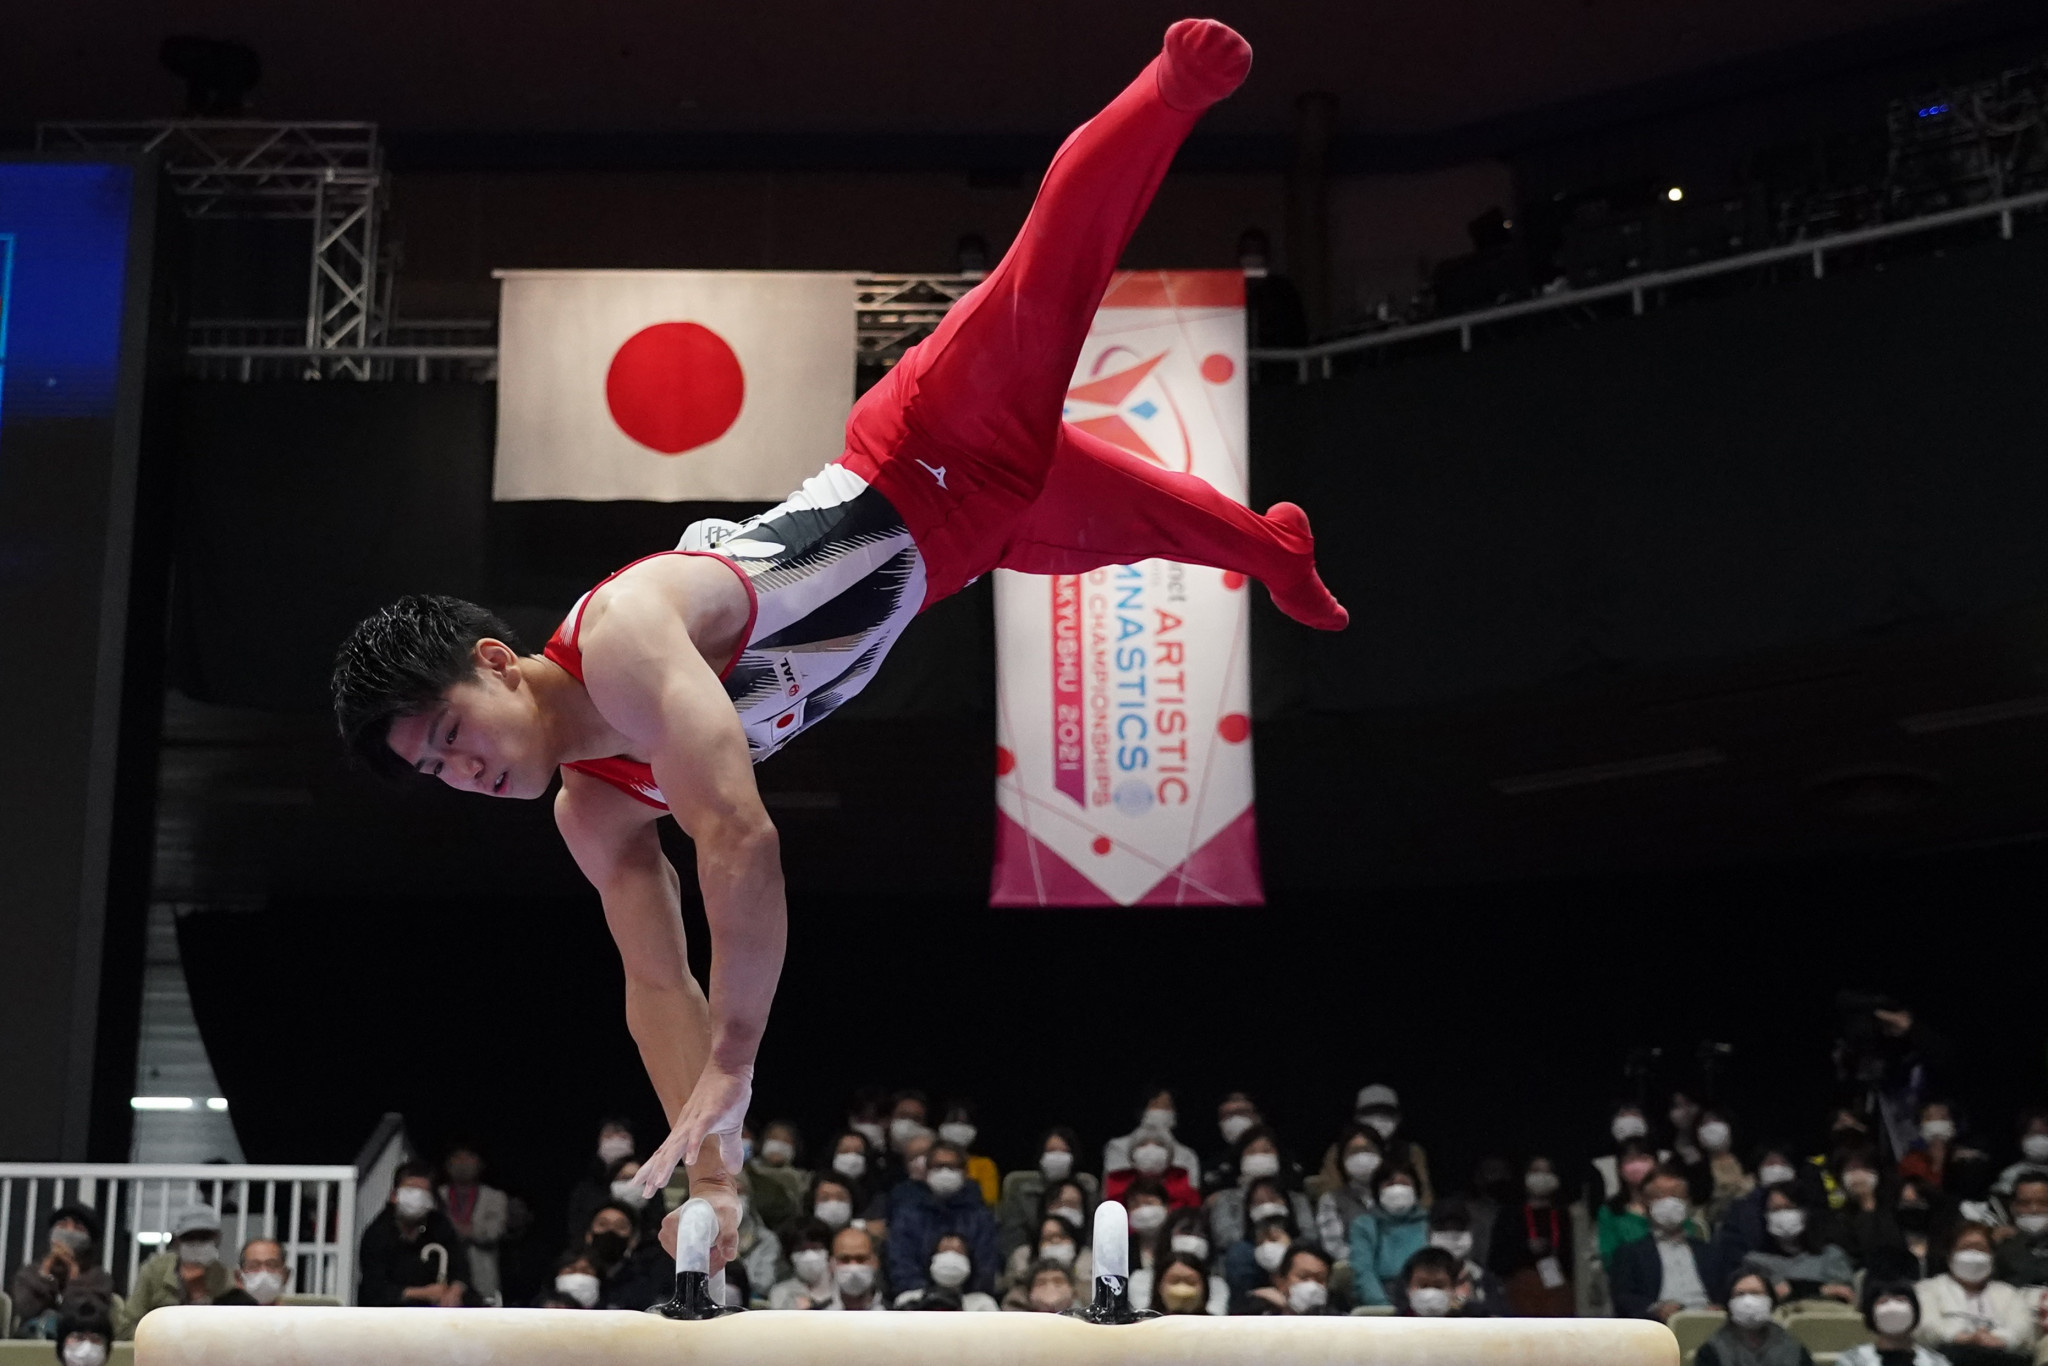 Daiki Hashimoto was unable to secure the men's all-around title in front of the Japanese crowd ©Getty Images